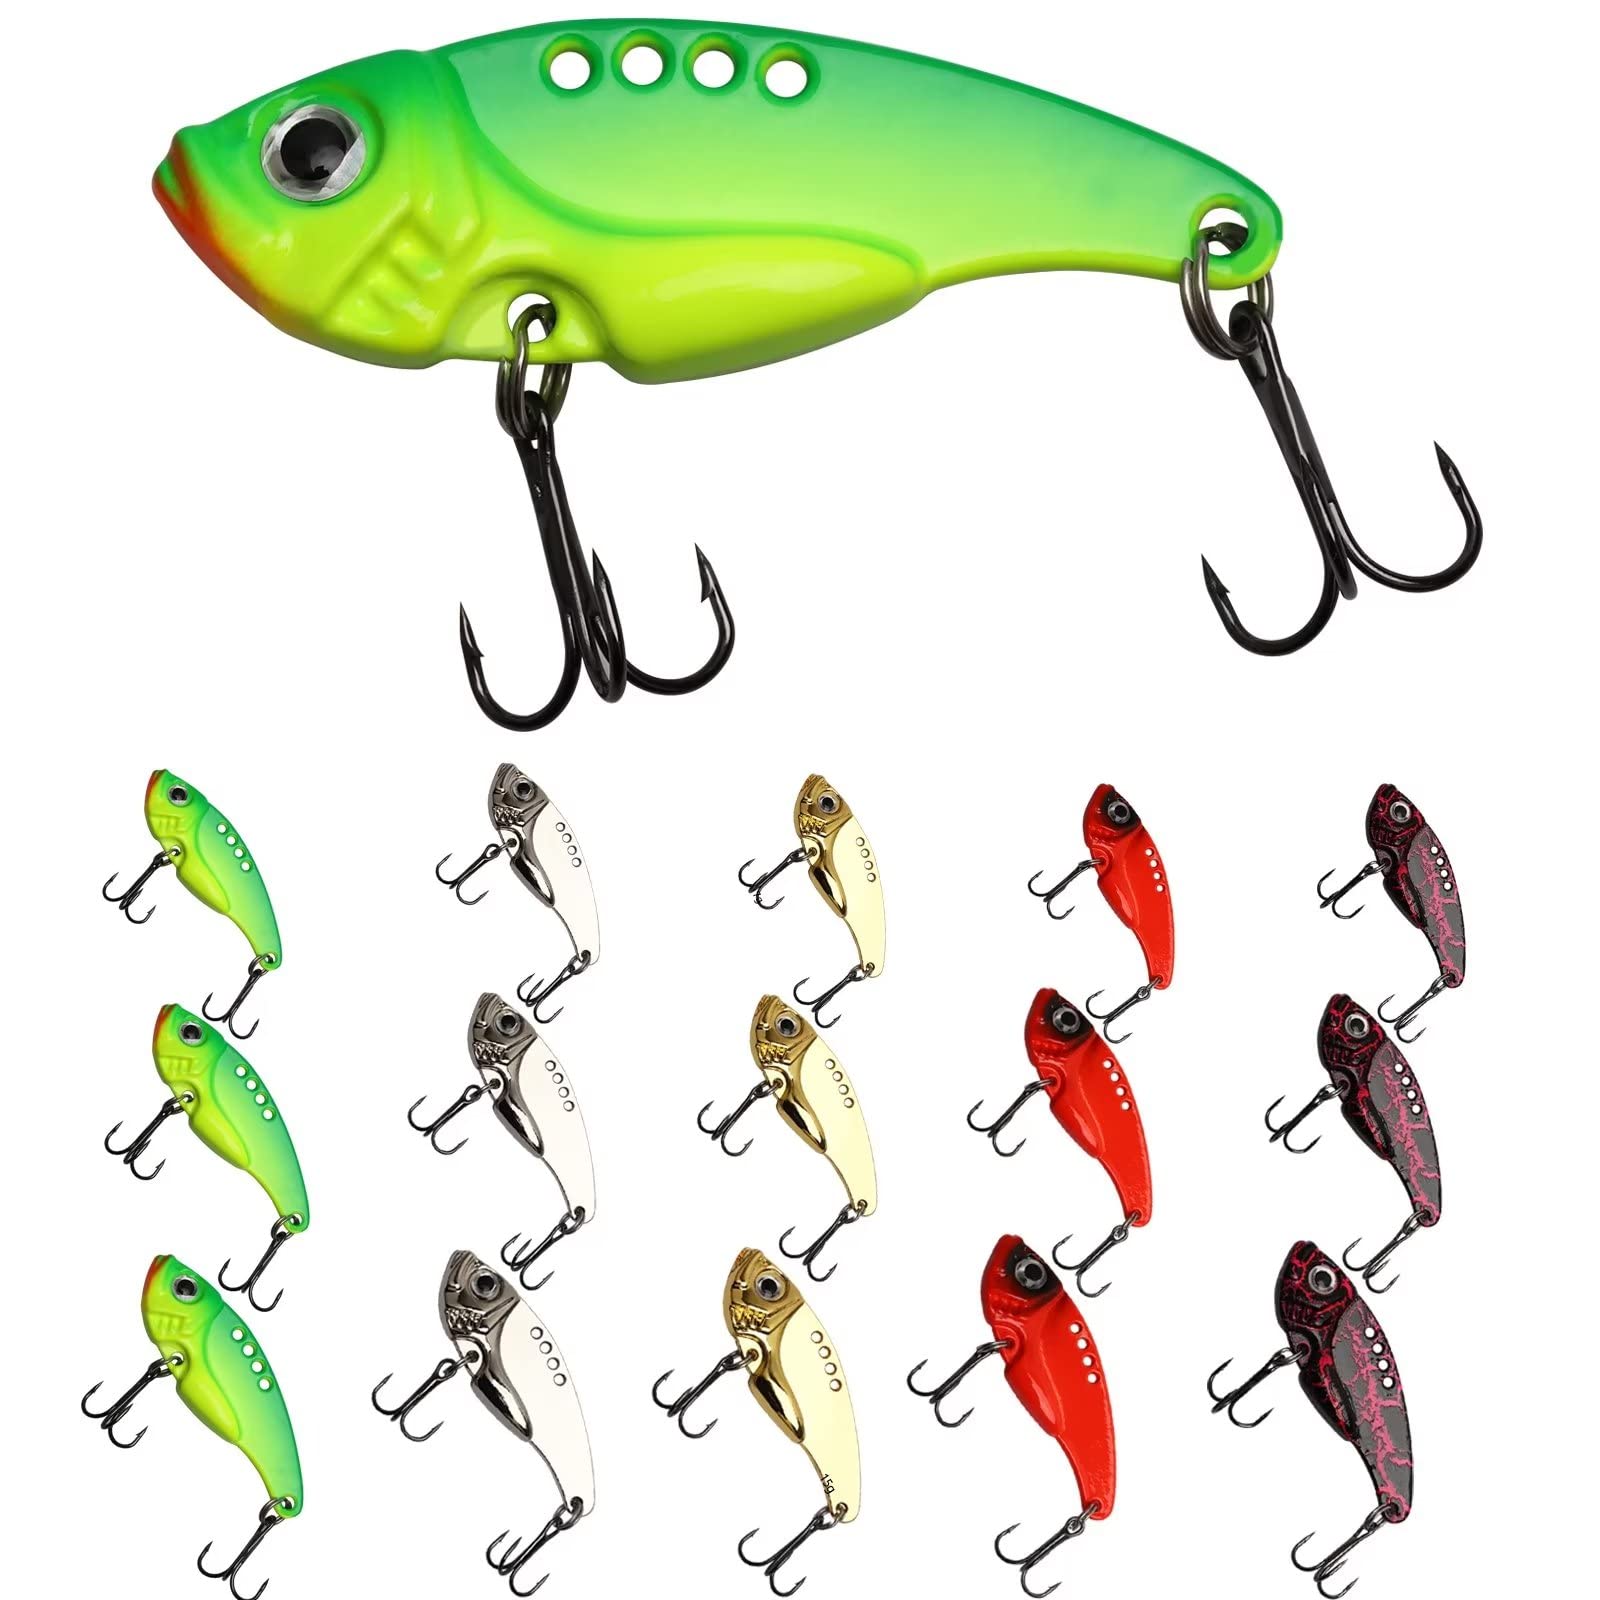 20pcs Fishing Lures Spinner bait for Bass Trout Salmon Walleye